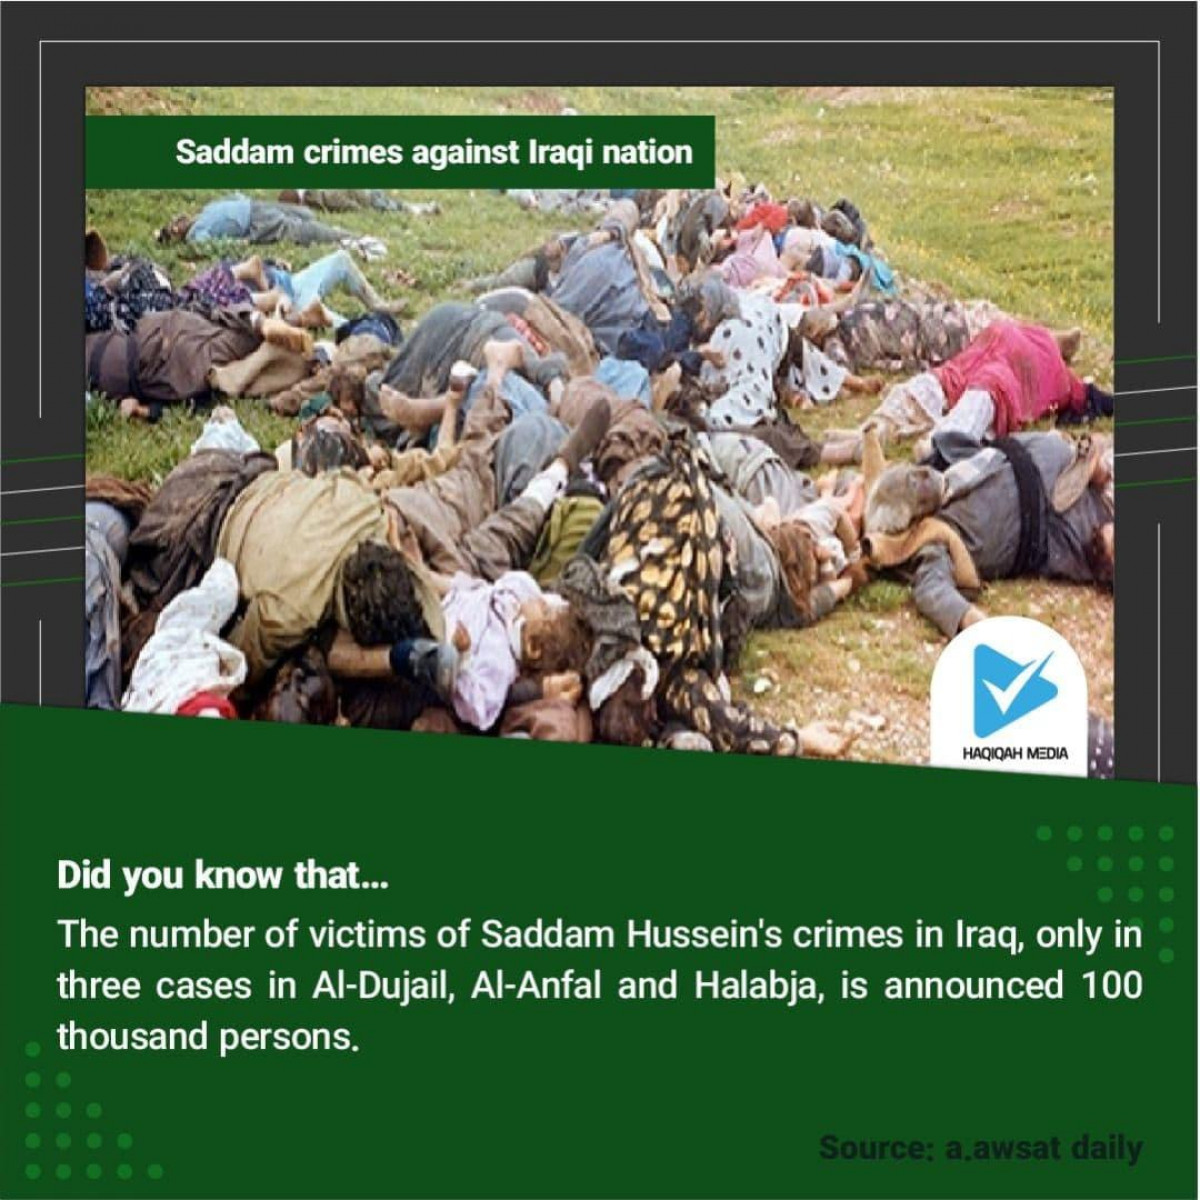 The number of victims of Saddam Hussein's crimes in Iraq